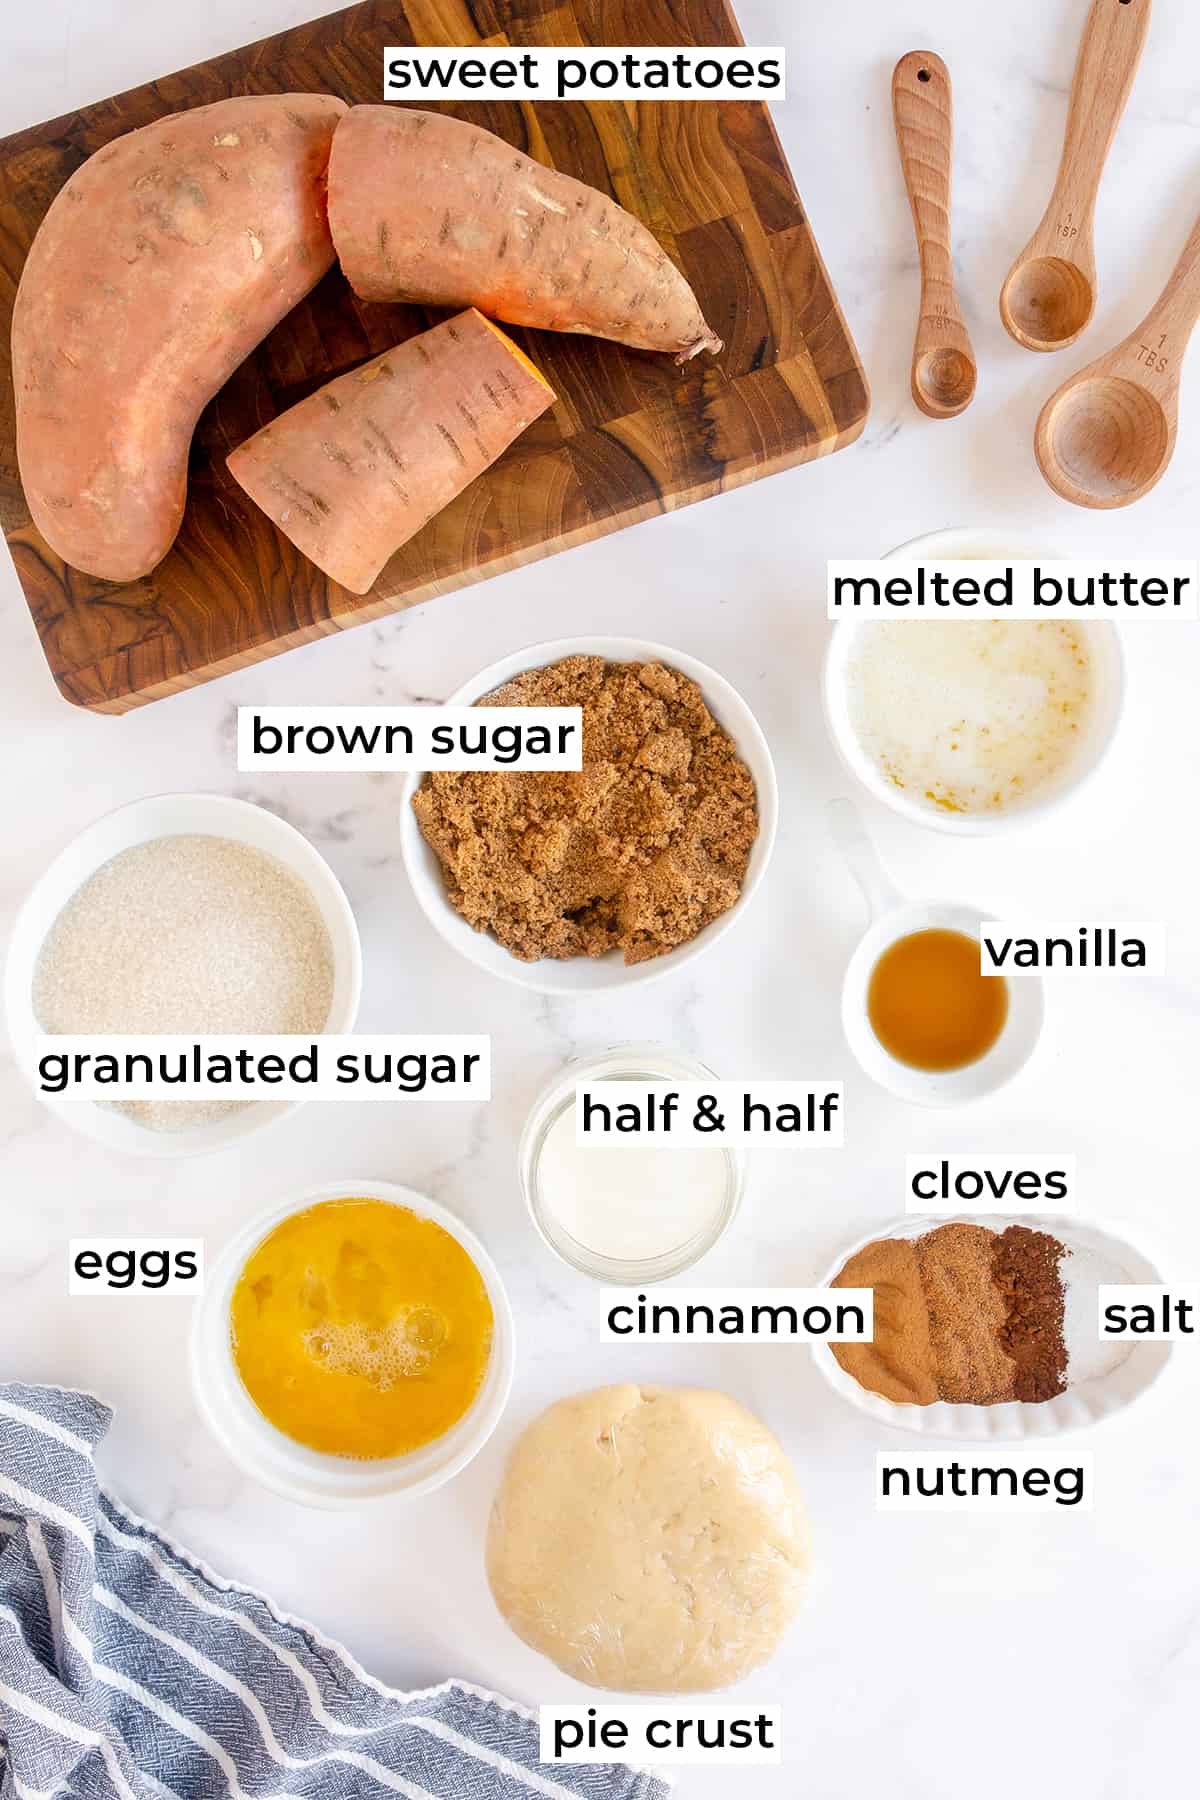 All the ingredient needed to make Sweet Potato Pie with text overlay.